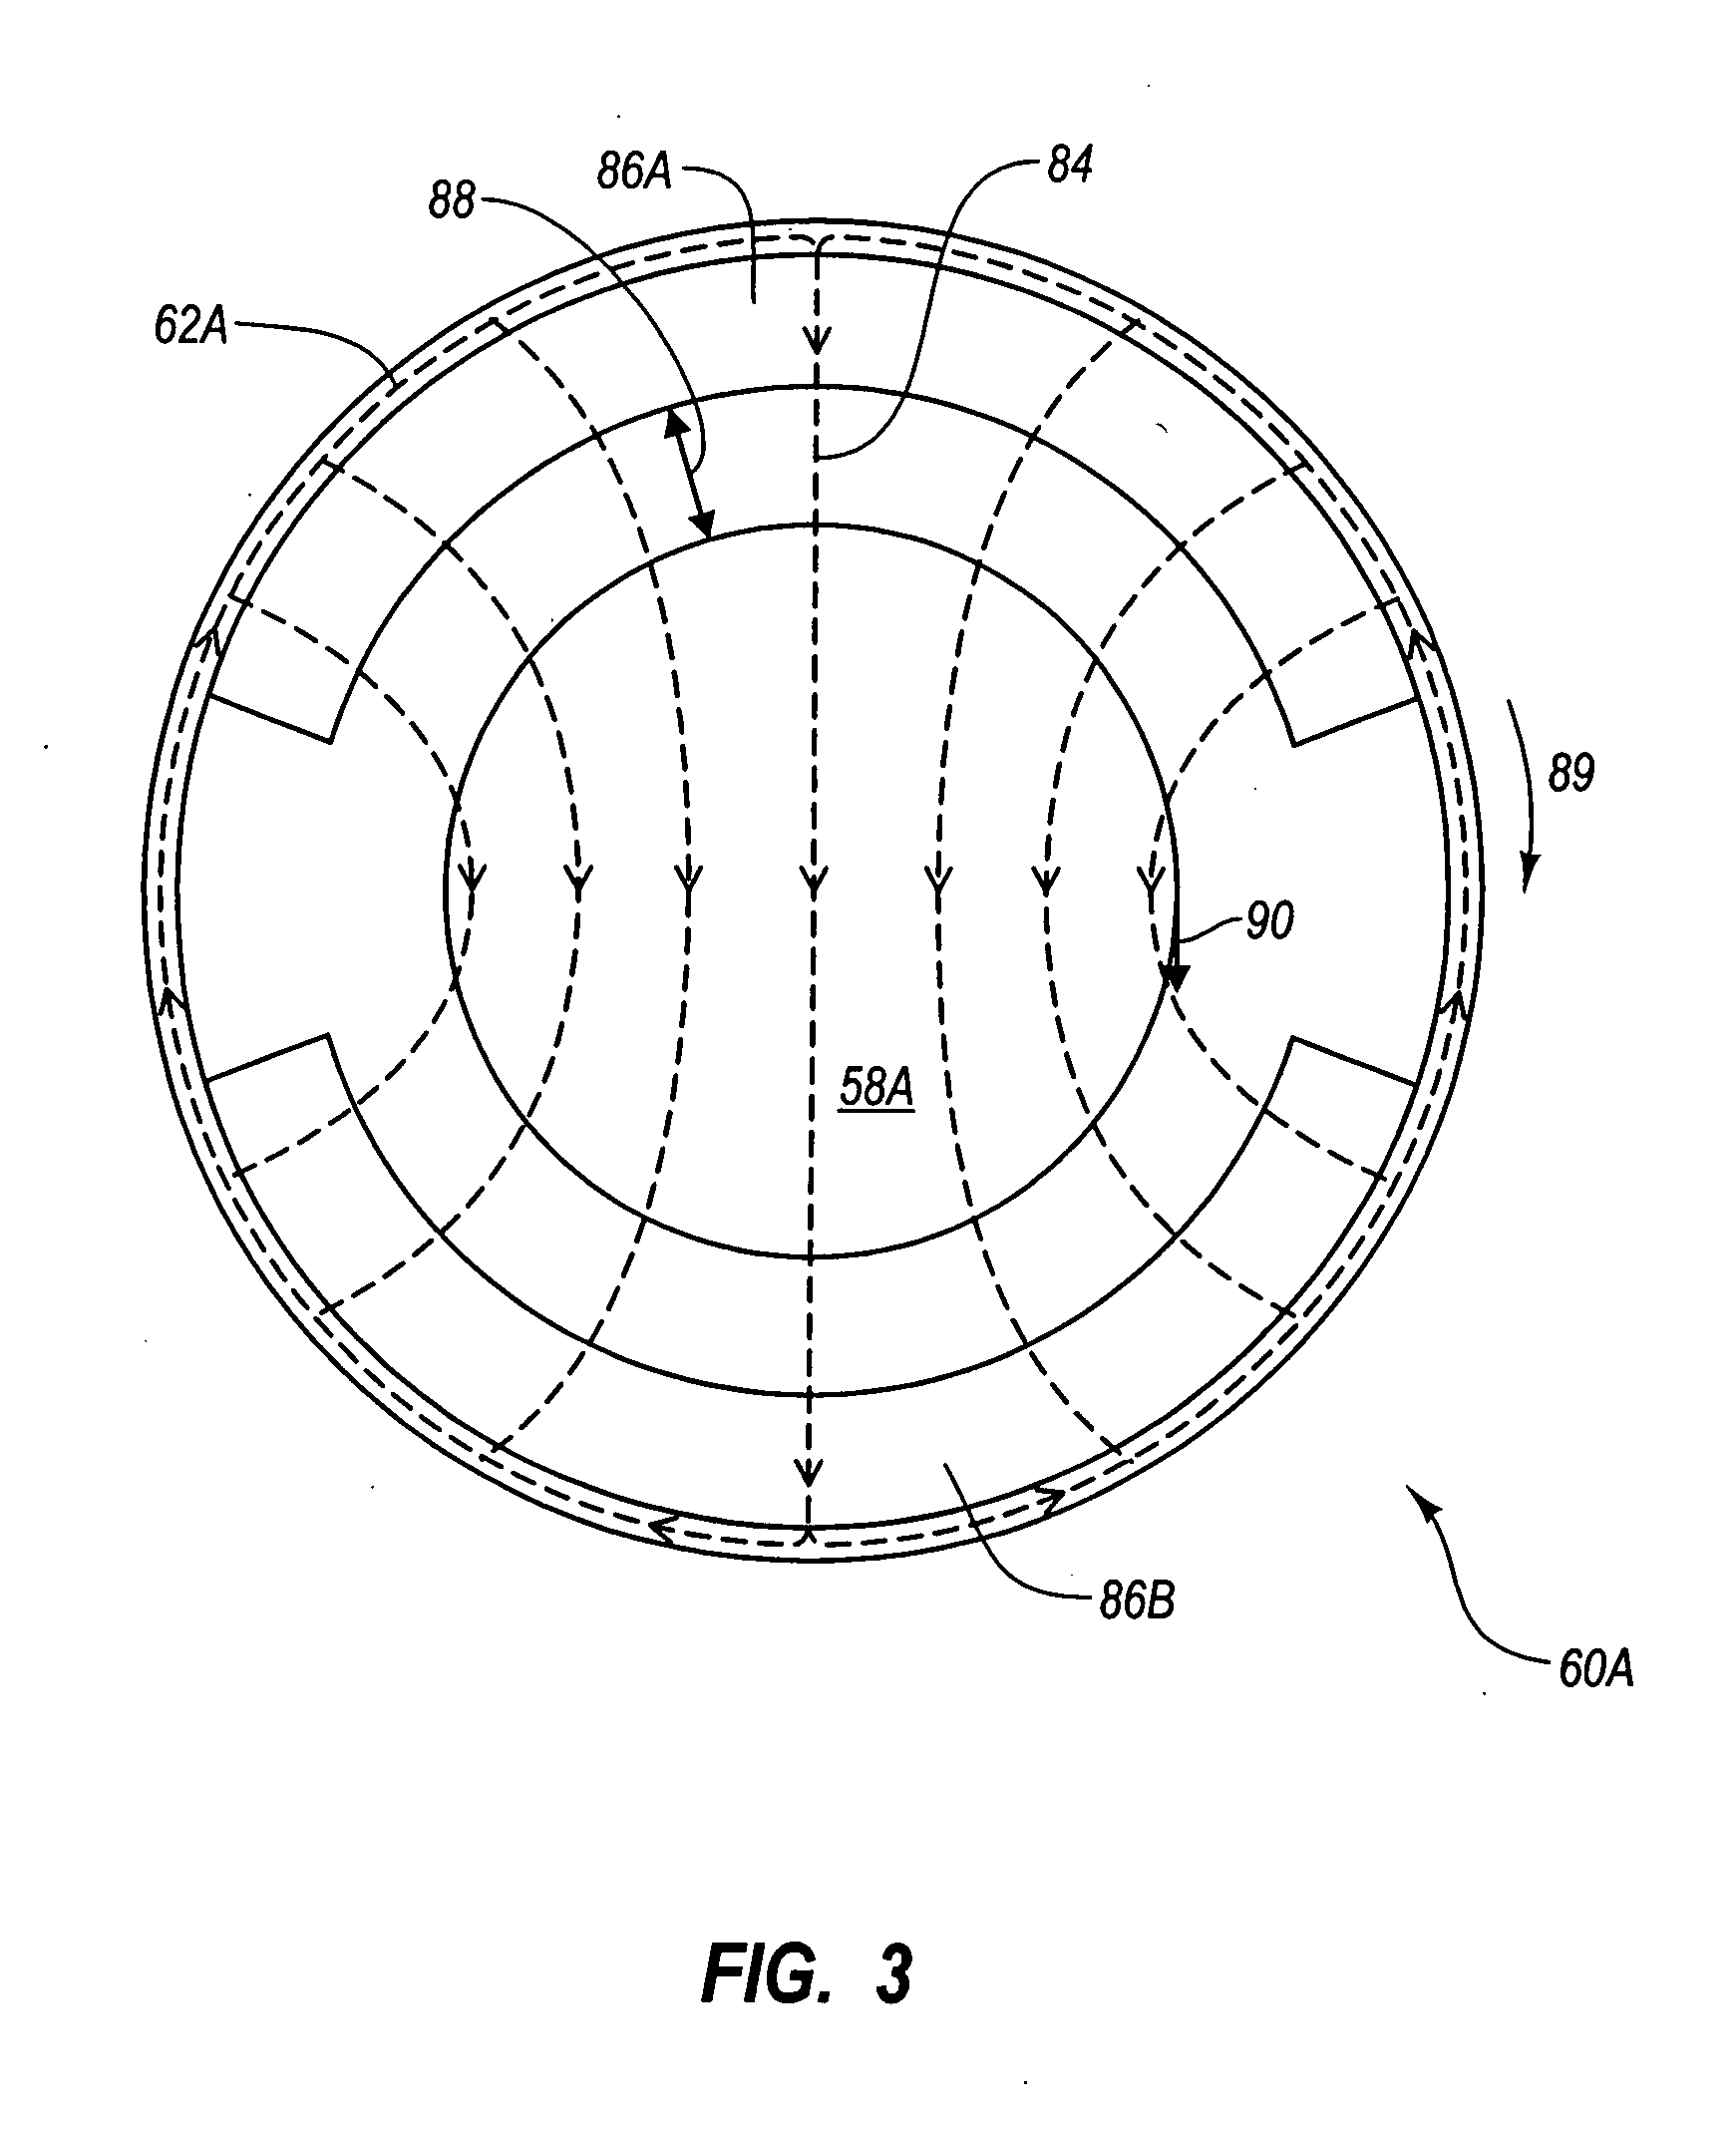 System for generating constant speed output from variable speed input